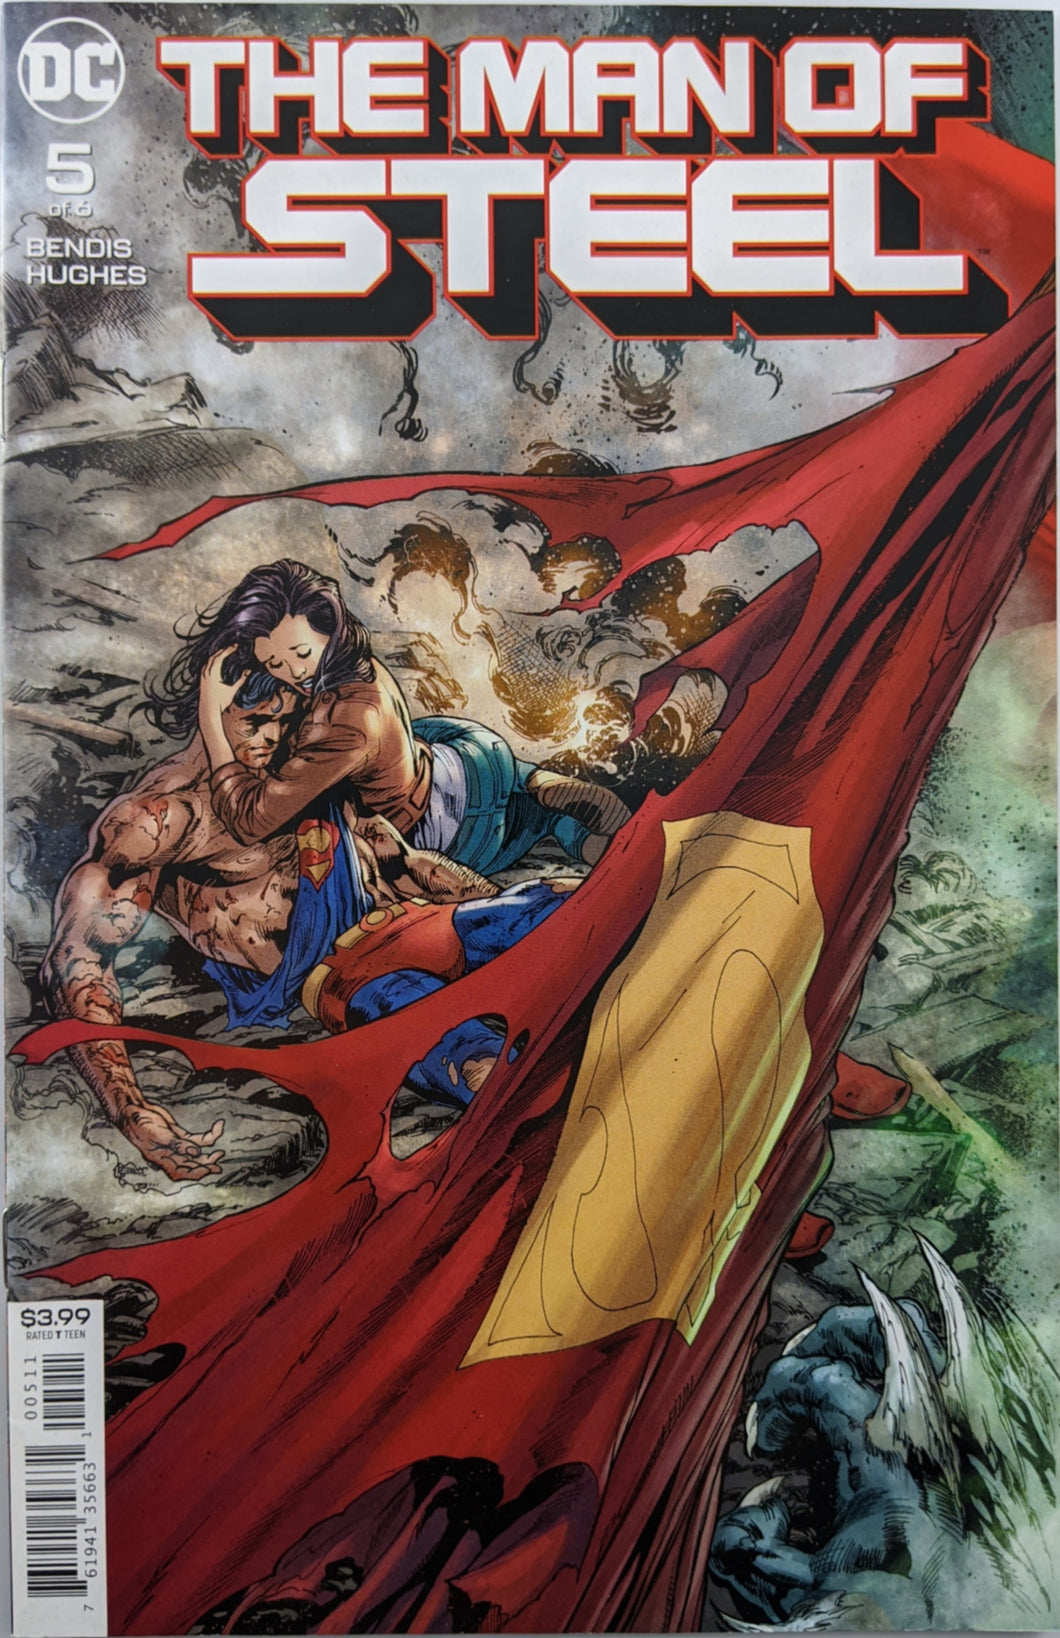 Man Of Steel, The (2018) #5 (of 6)